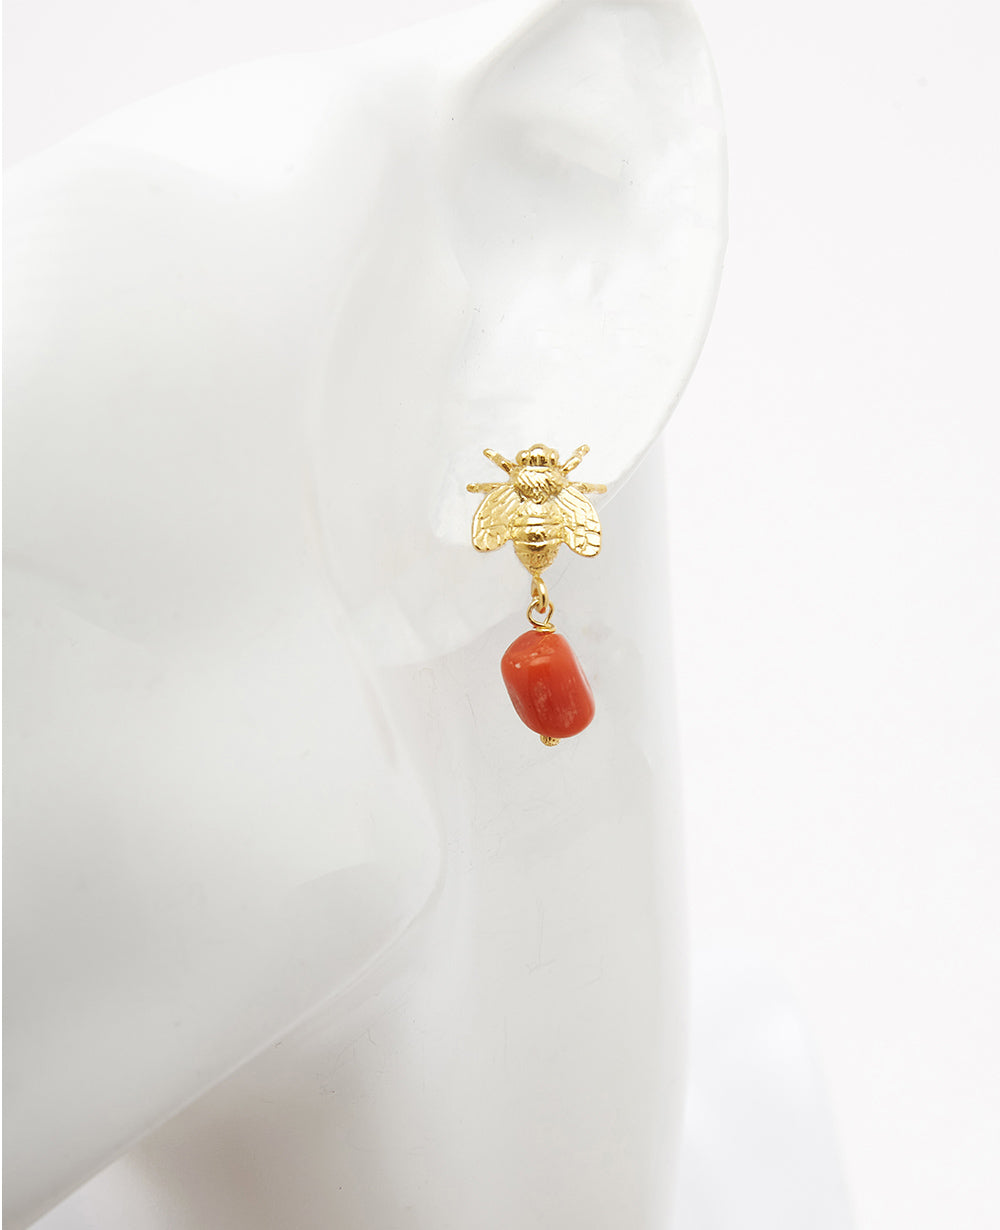 EARRINGS “MELISSA” GOLD/CORAL